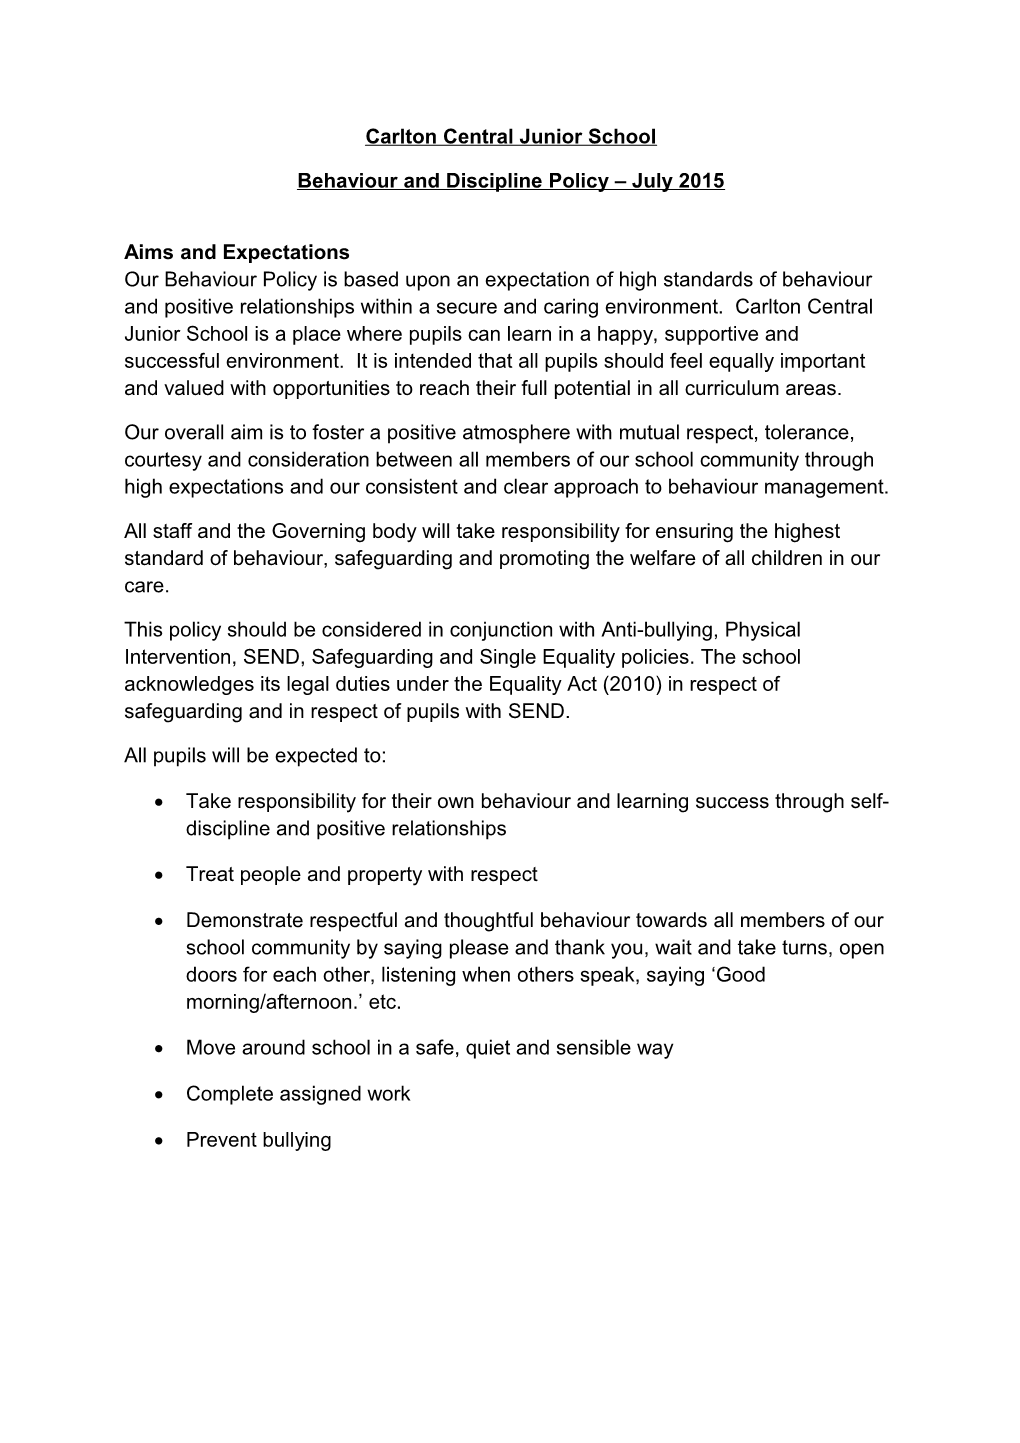 Behaviour and Discipline Policy July 2015